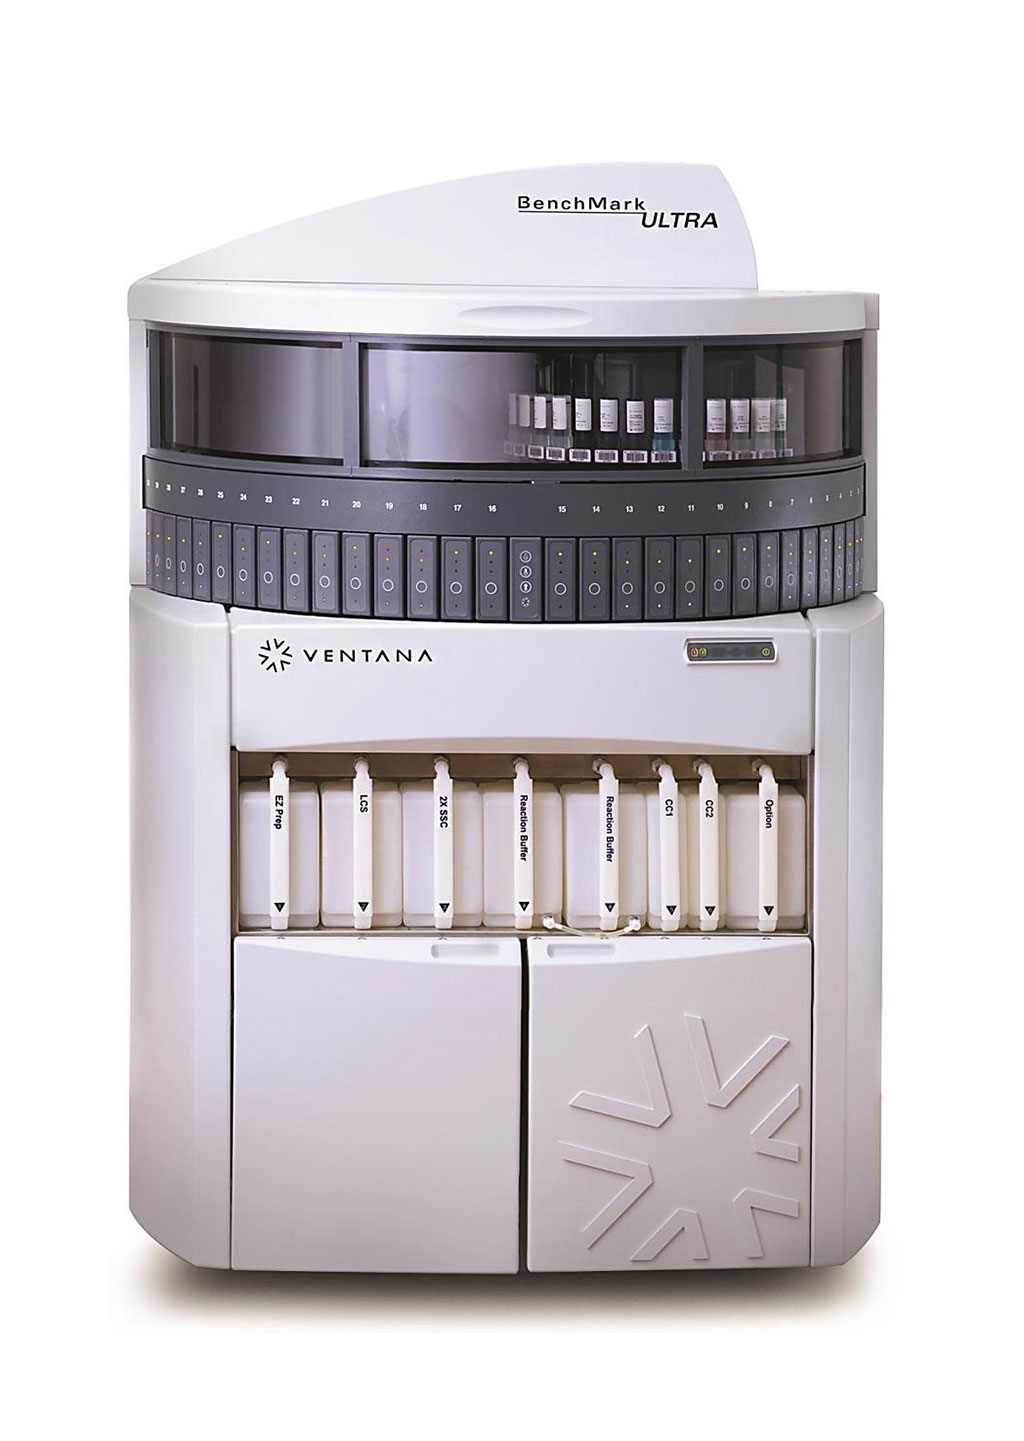 Image: The Ventana BenchMark Ultra autostainer is for cancer diagnostics with automation and the test menu include IHC, ISH, and FITC tests (Photo courtesy of Ventana Medical System)